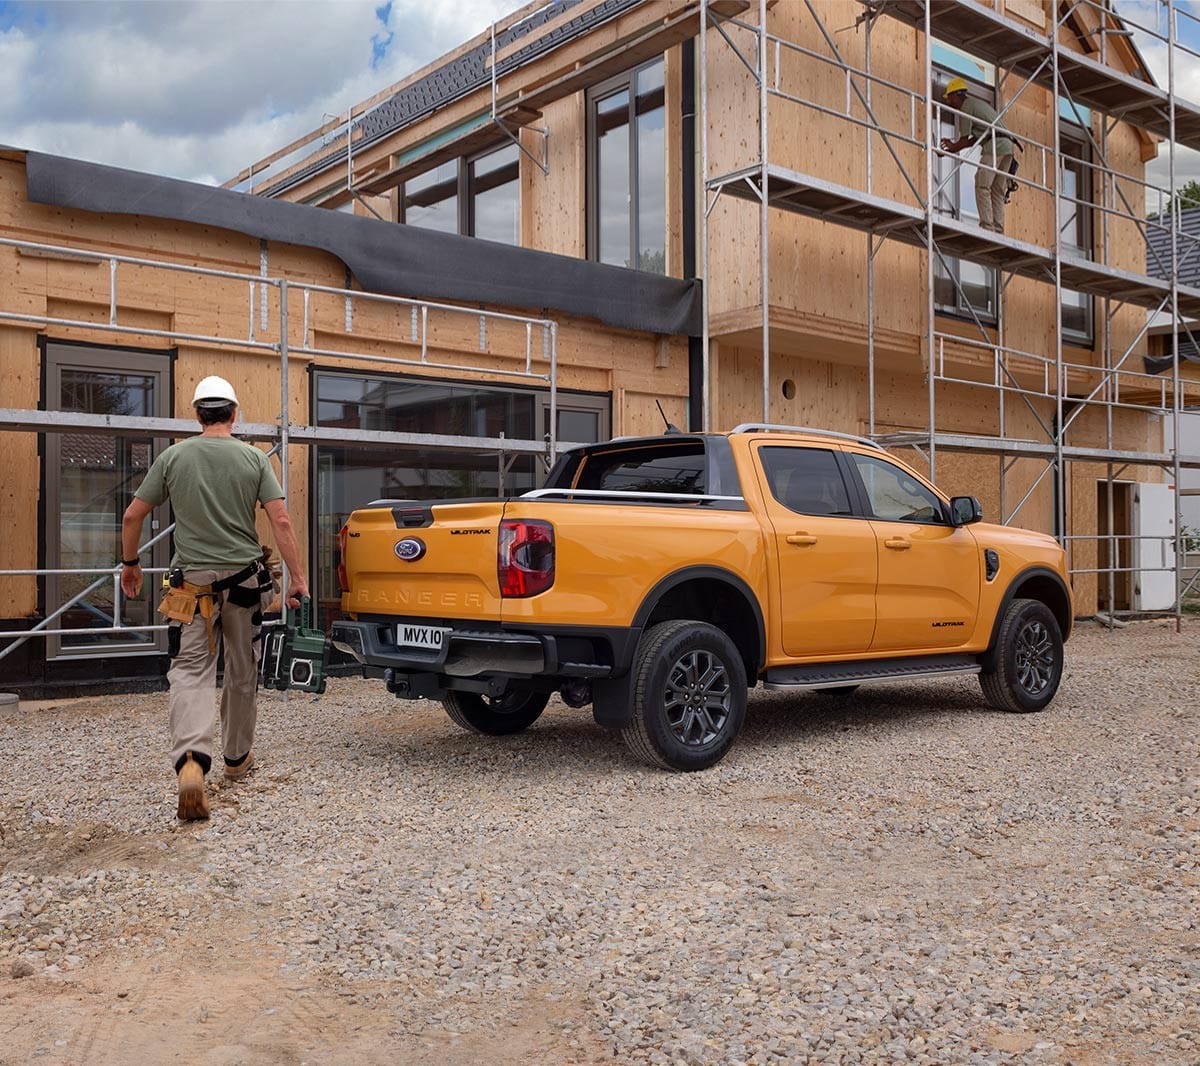 Ford Ranger Wildtrak parked by construction 3/4 rear view